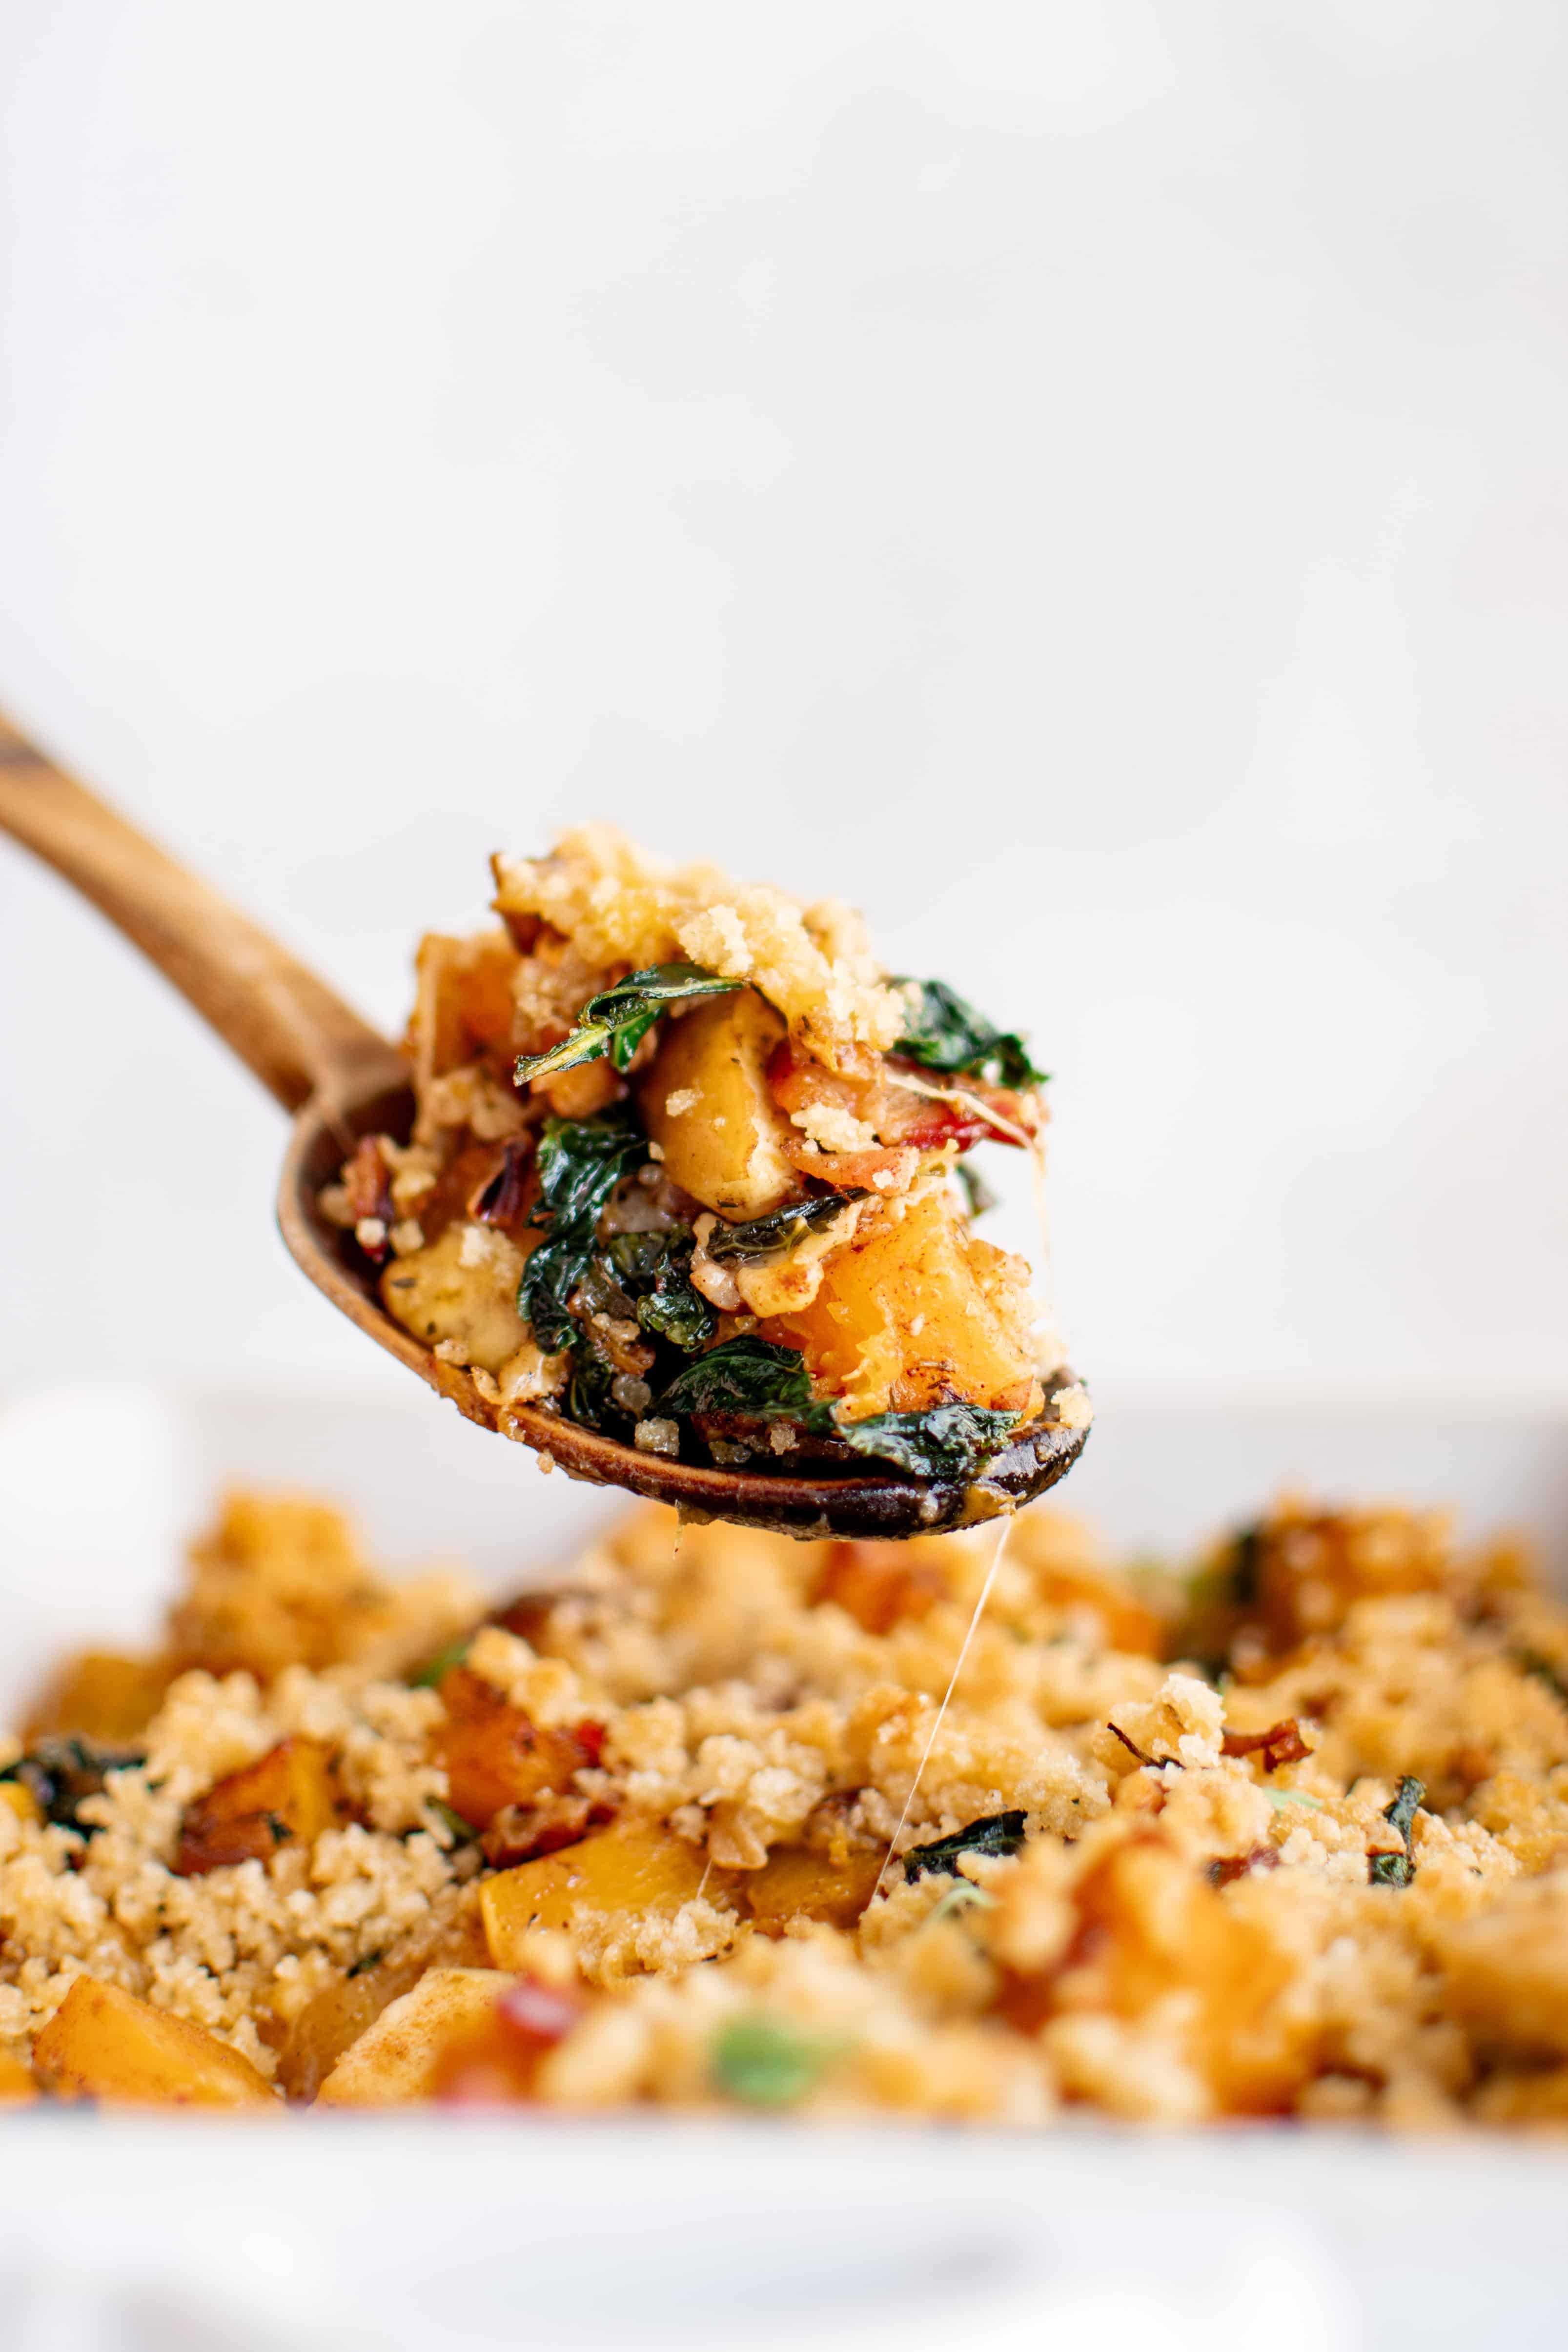 Large serving spoon filled with butternut squash casserole showing everything that it has to offer including kale, pecans, bacon, apple, and cheese.